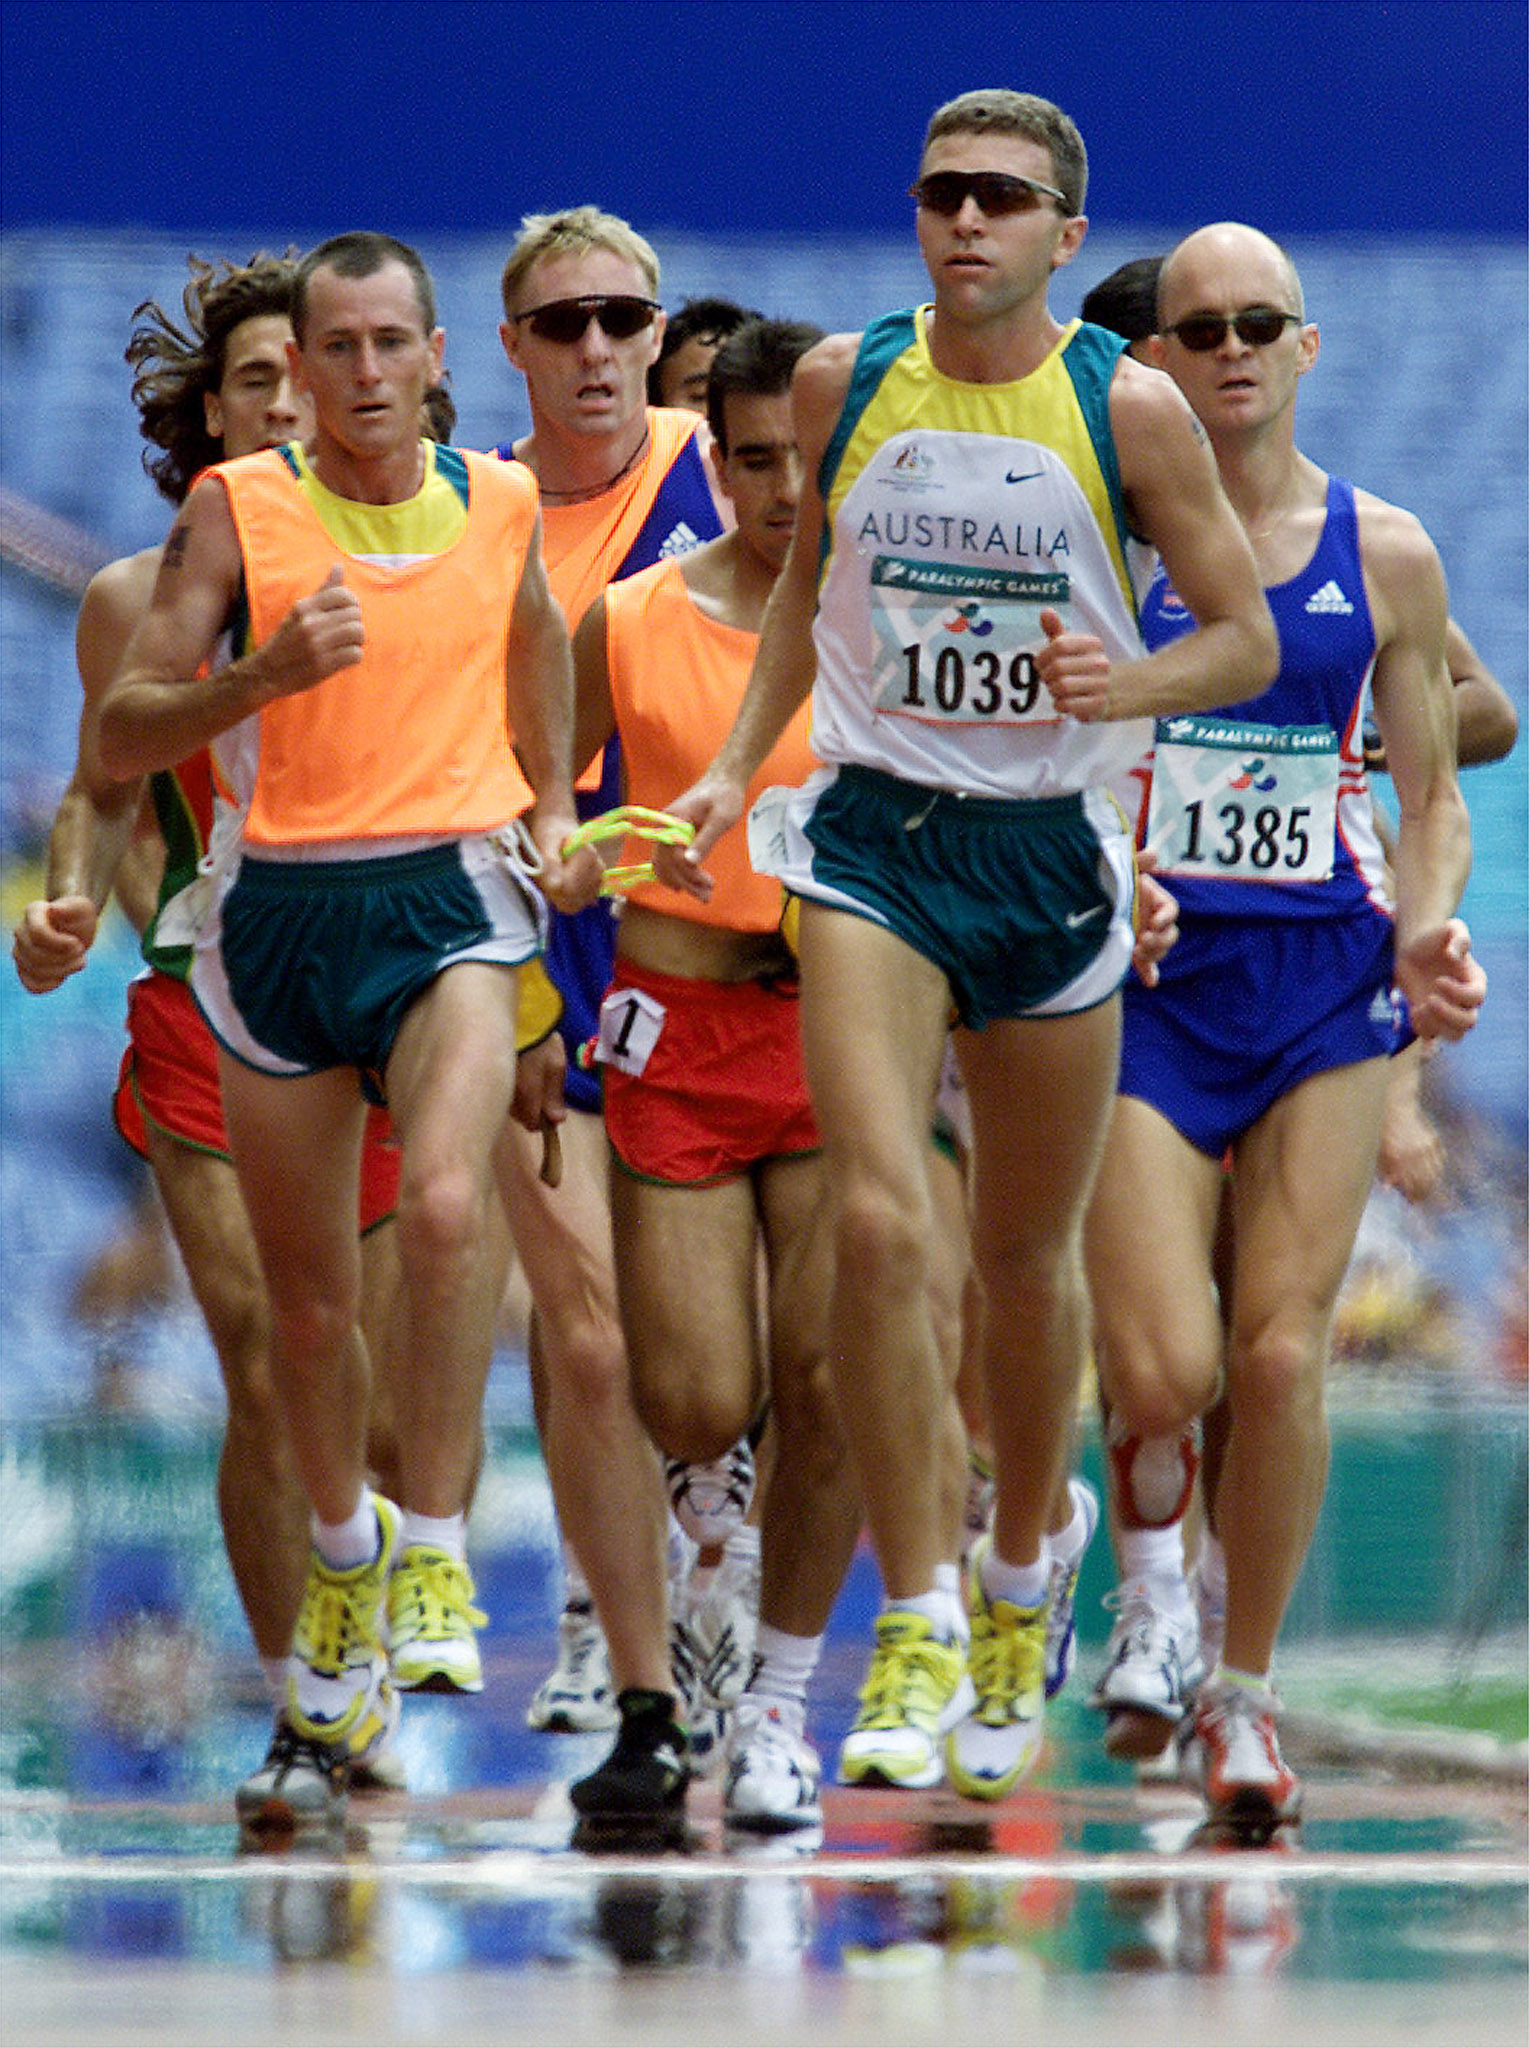 blind runner gerrard gosens holds onto a tether to his guide while in motion on a track at the sydney 2000 olympics. Ausnew Home Care, NDIS registered provider, My Aged Care